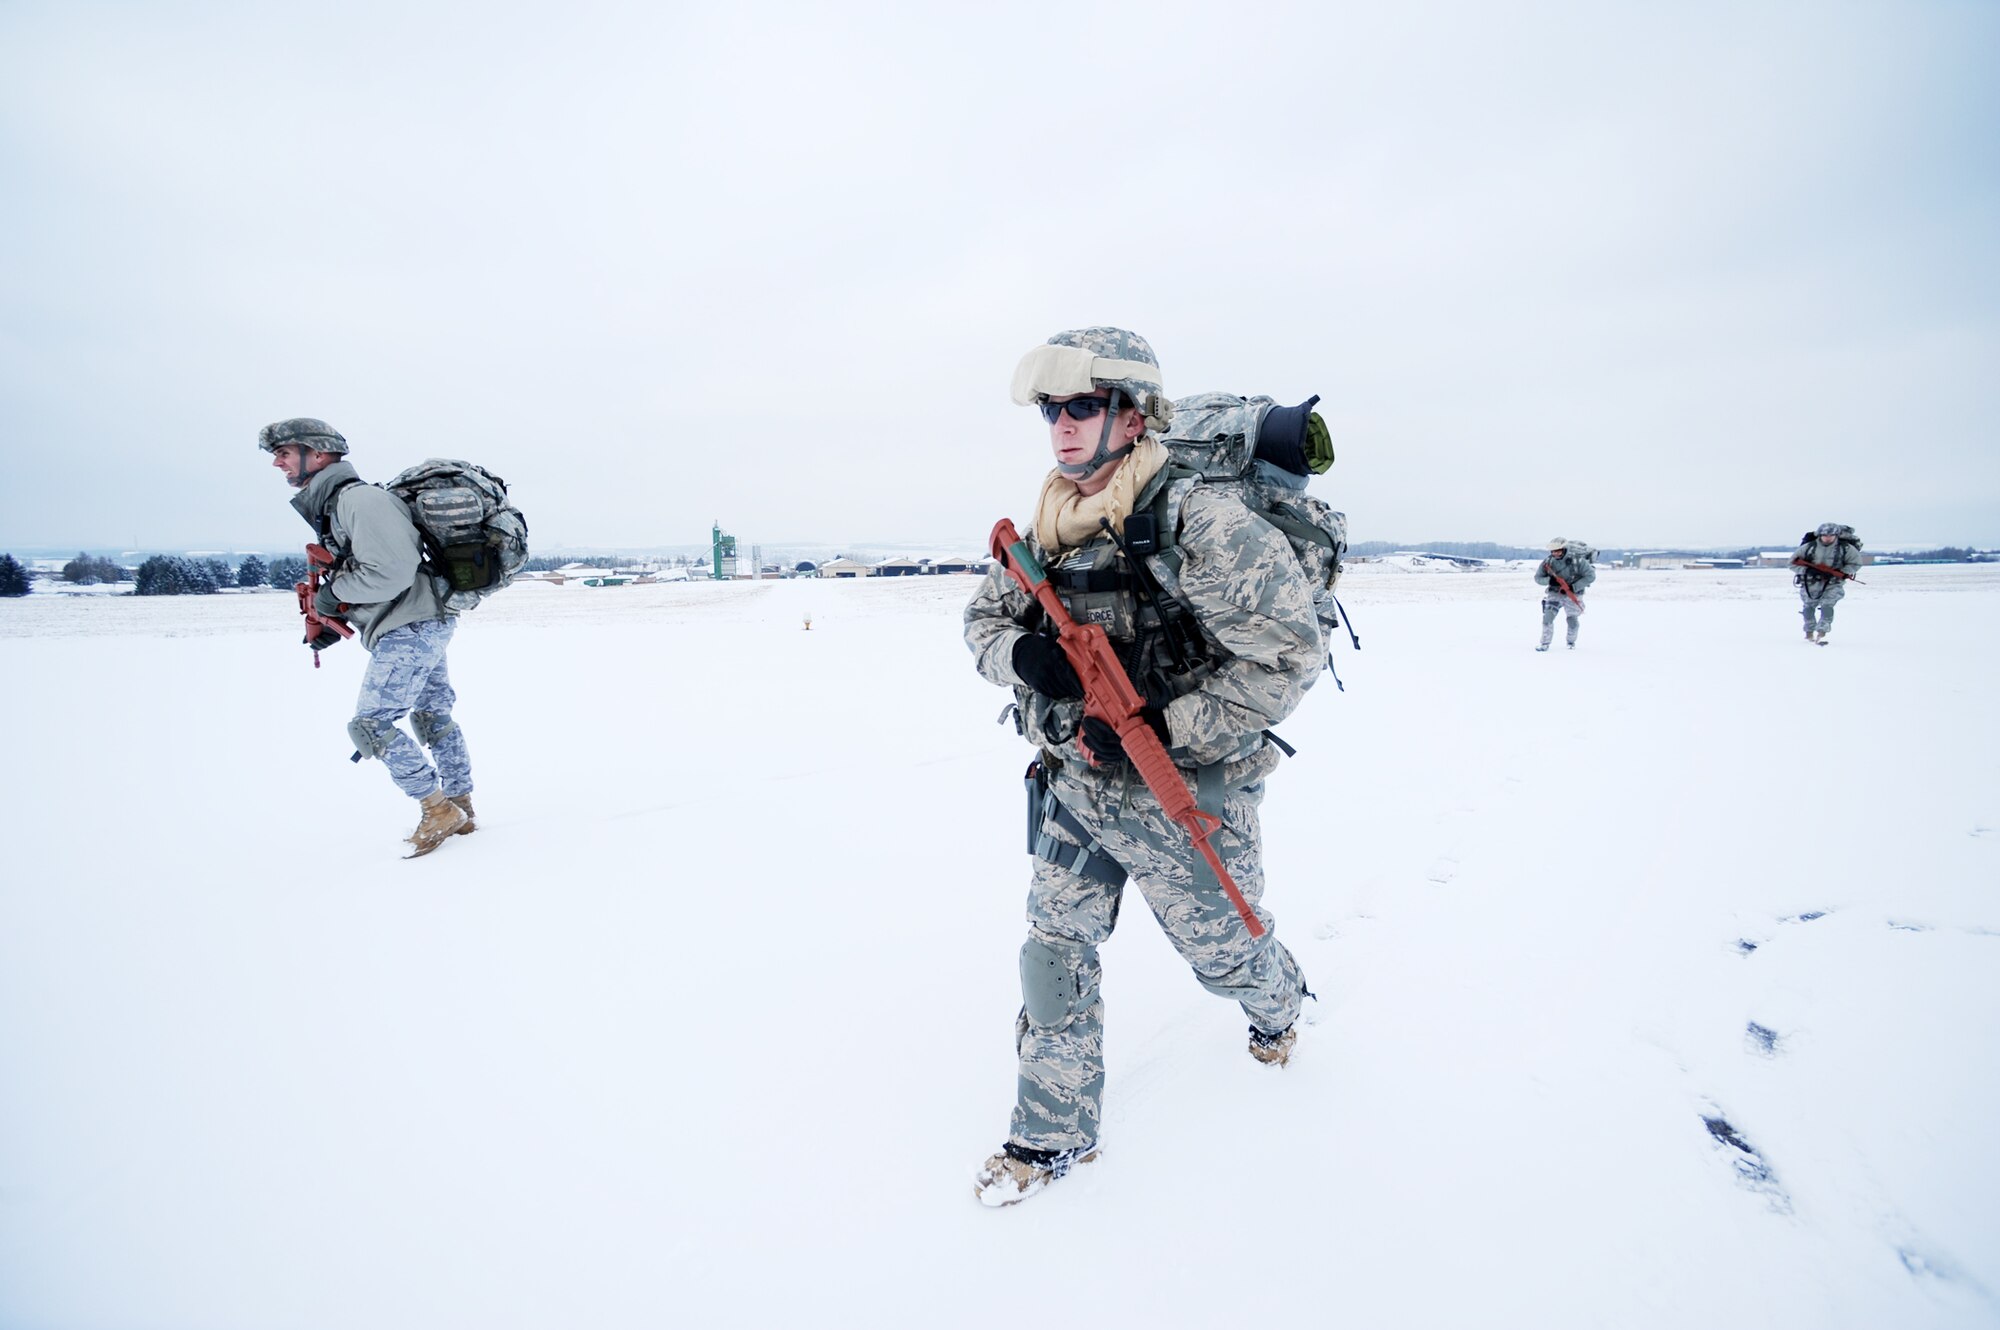 Capt. Mark Breed and Staff Sgt. John Gaunt from Ramstein Air Base, Germany, make their way to the rally point after an airborne insertion mission at nearby Bitburg Airport Jan. 25, 2010.  (U.S. Air Force photo/Staff Sgt. Sarayuth Pinthong)